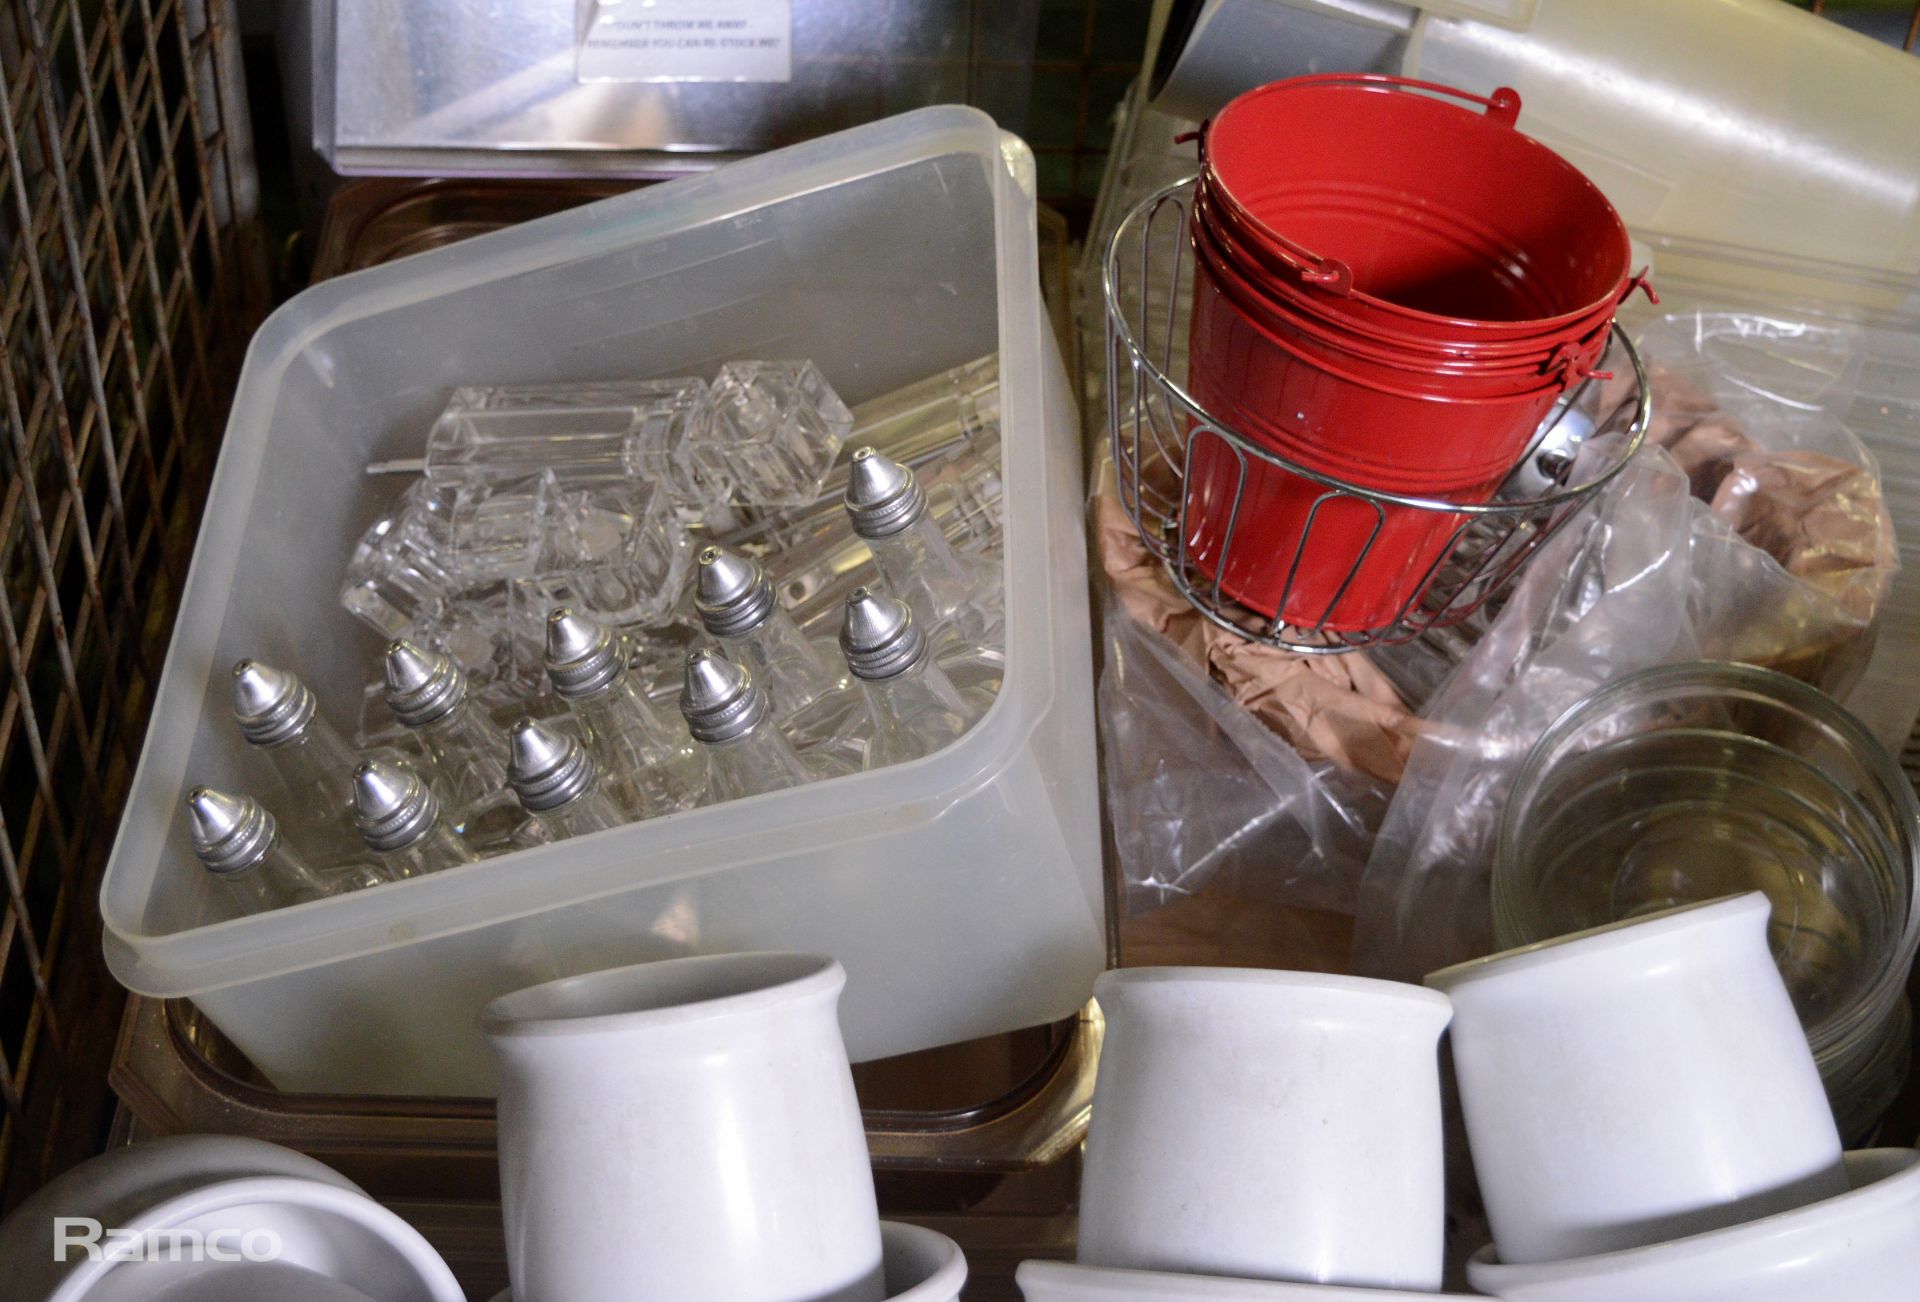 Kitchenware - cutlery and storage tubs - Image 2 of 5